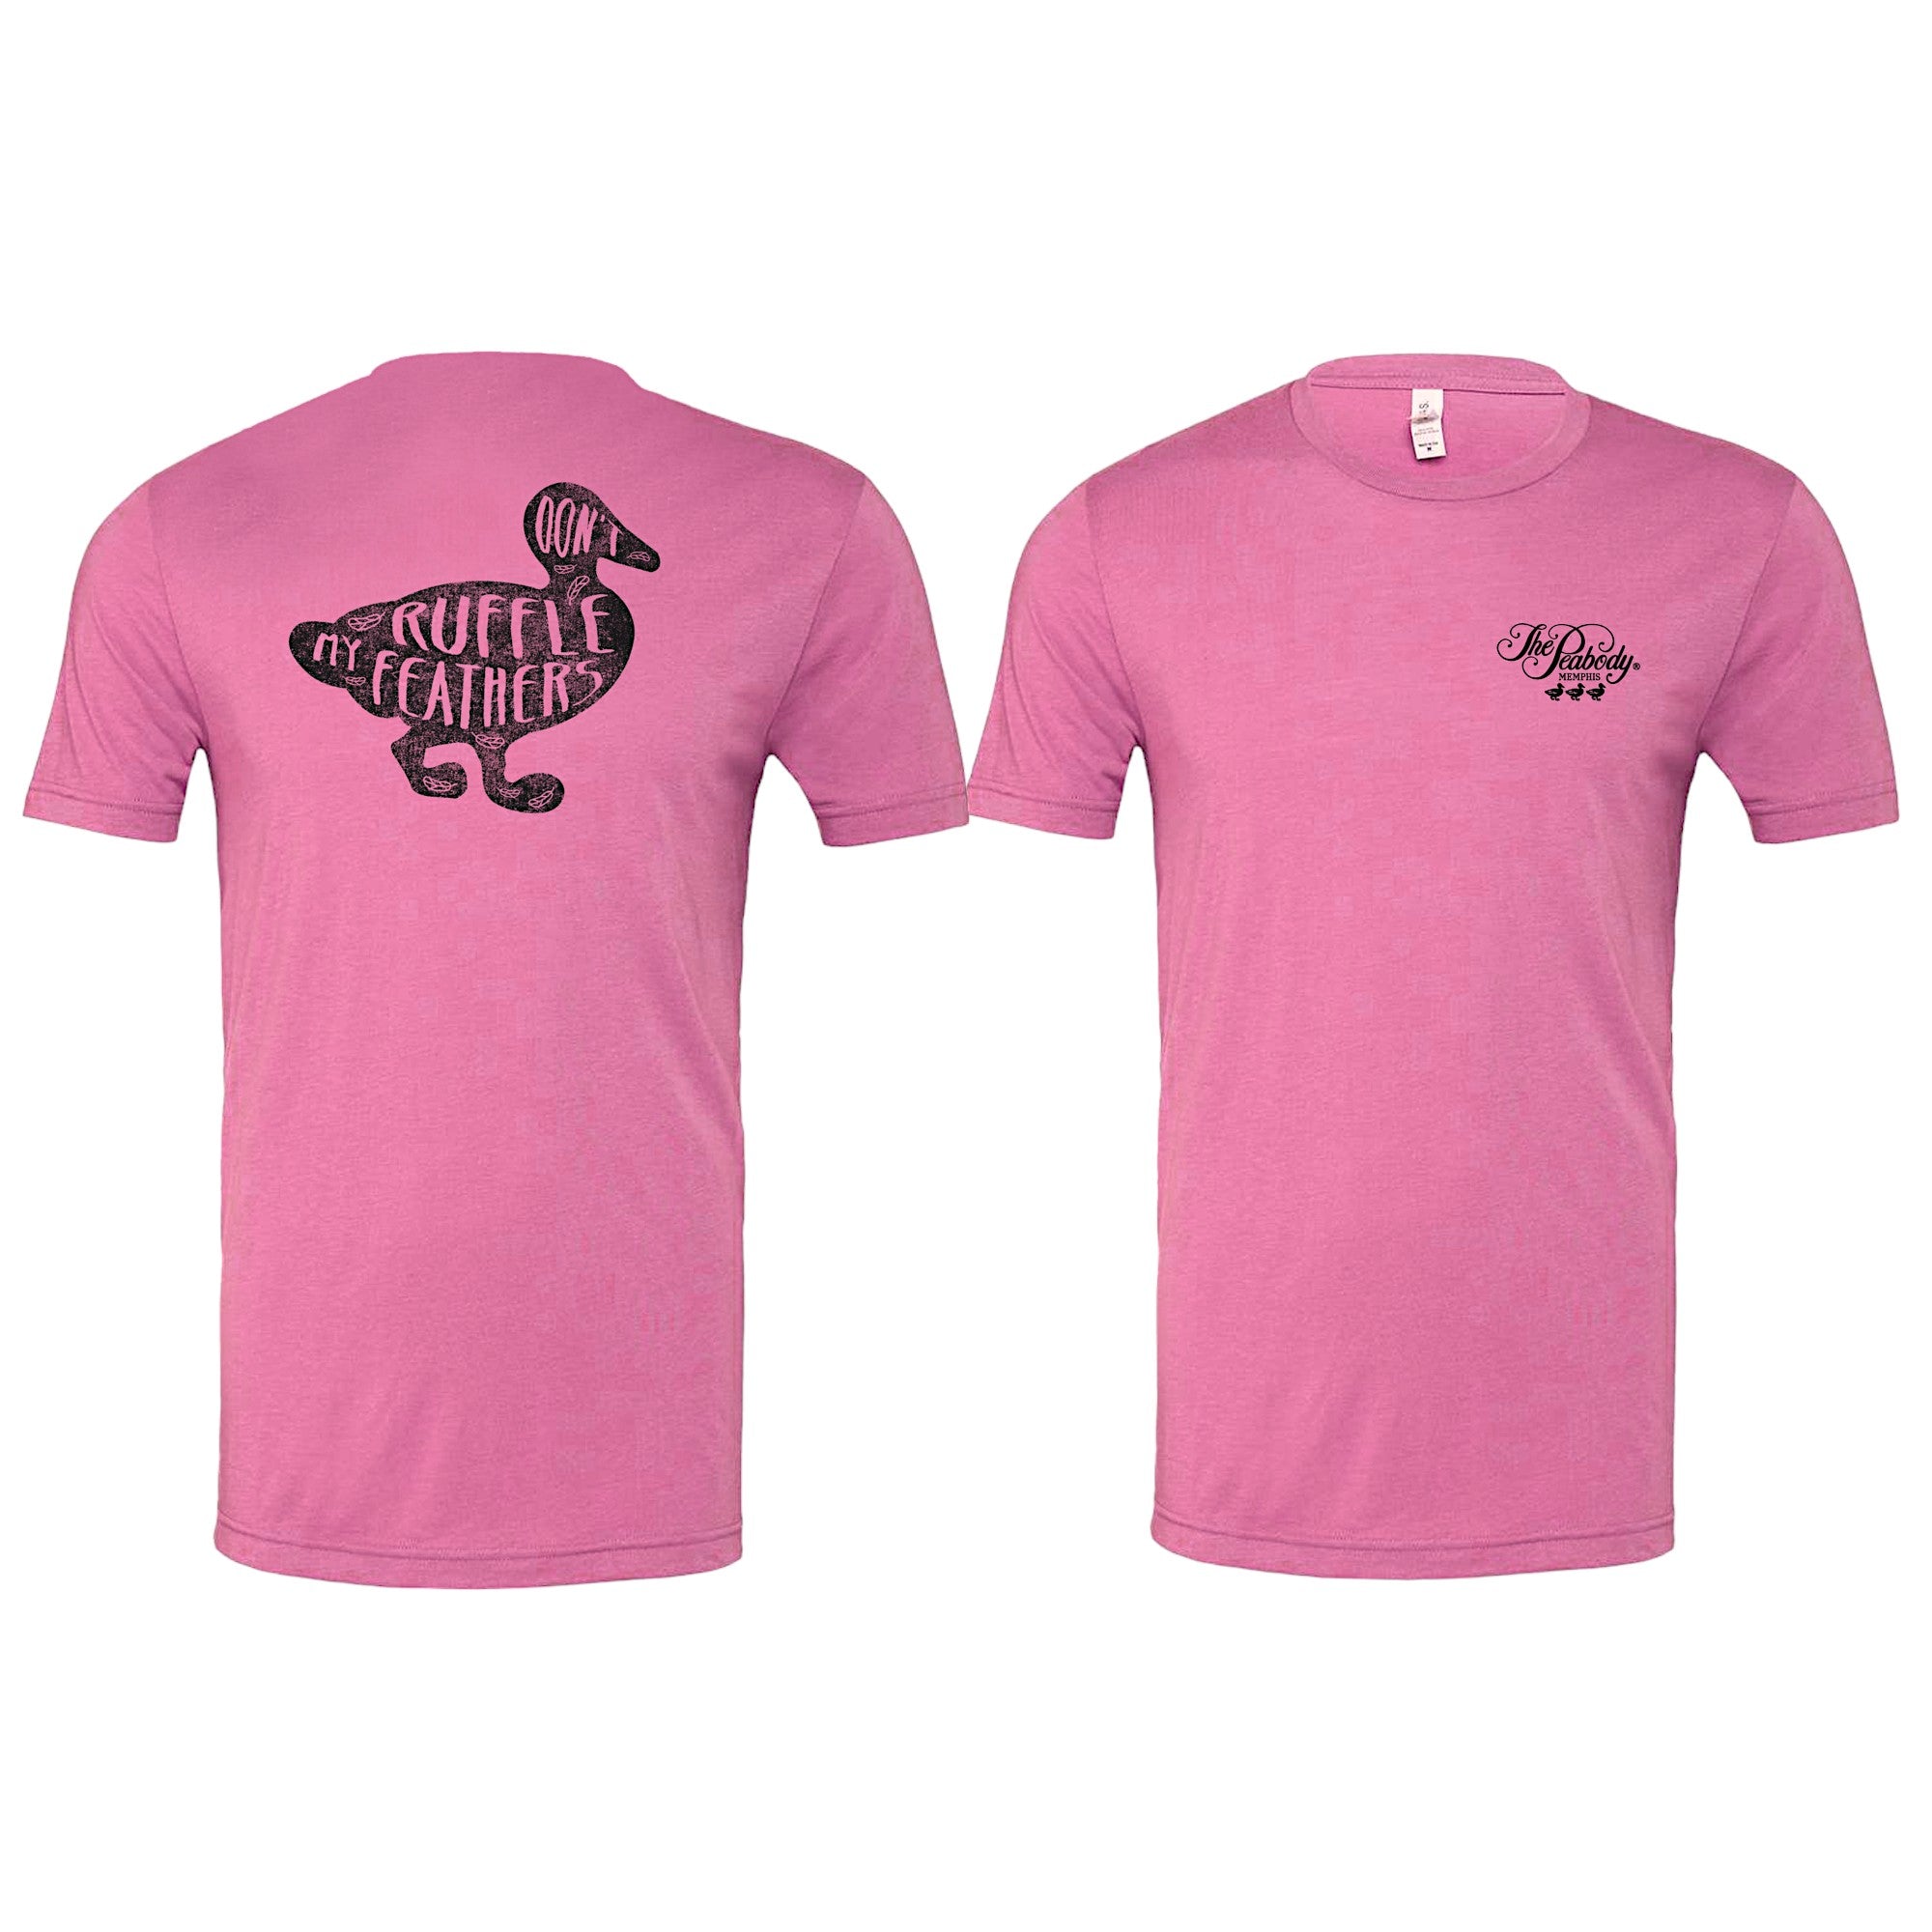 Don't Ruffle My Feathers Tee - Pink